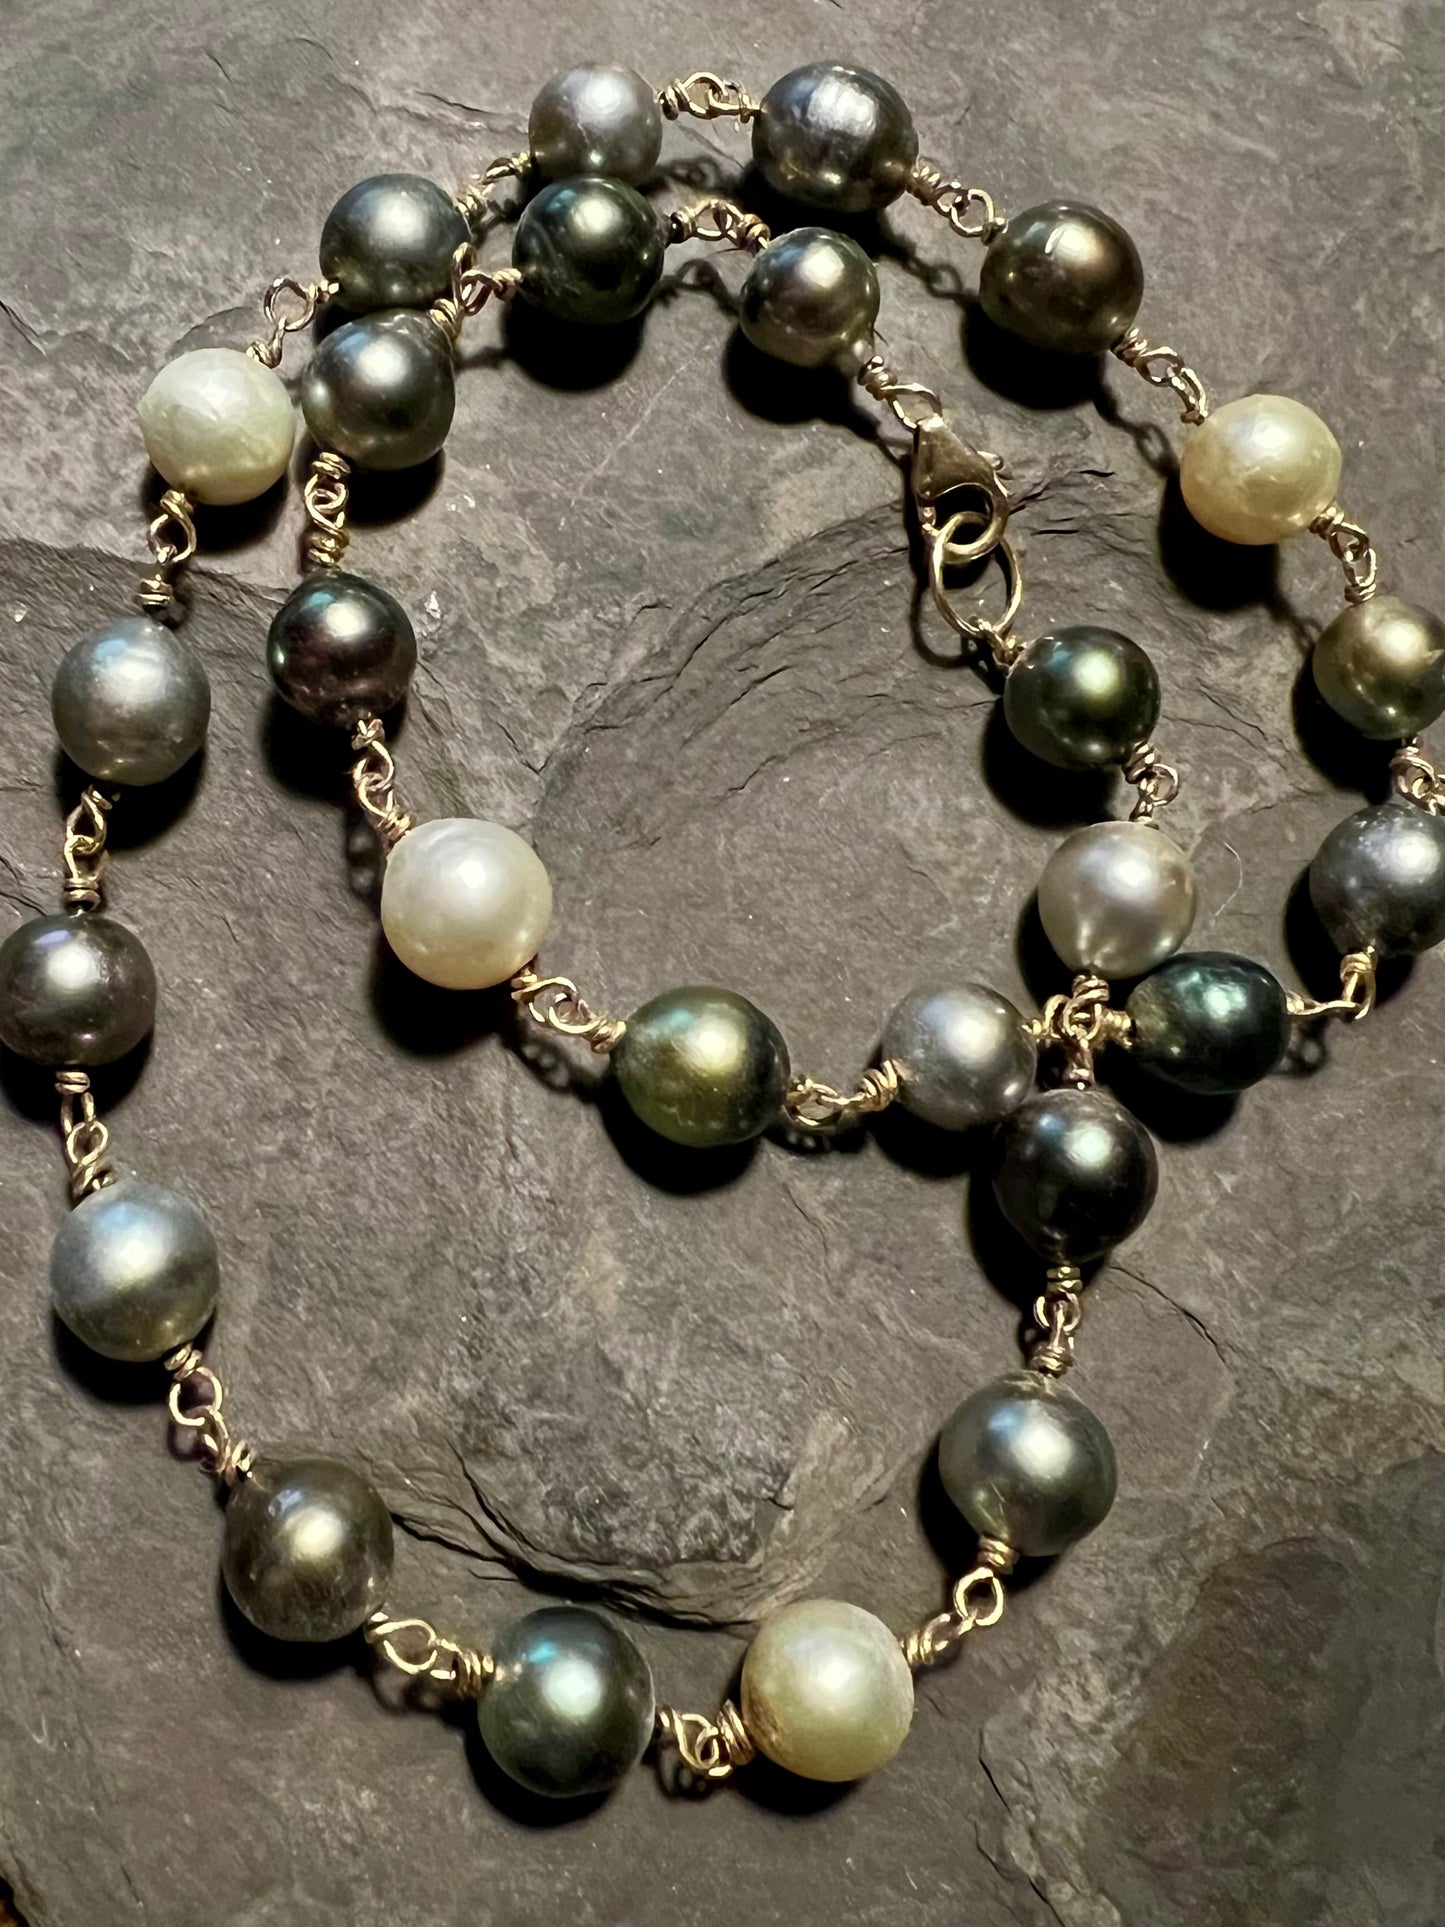 Stormy Tahitian Pearl Necklace - One of a Kind